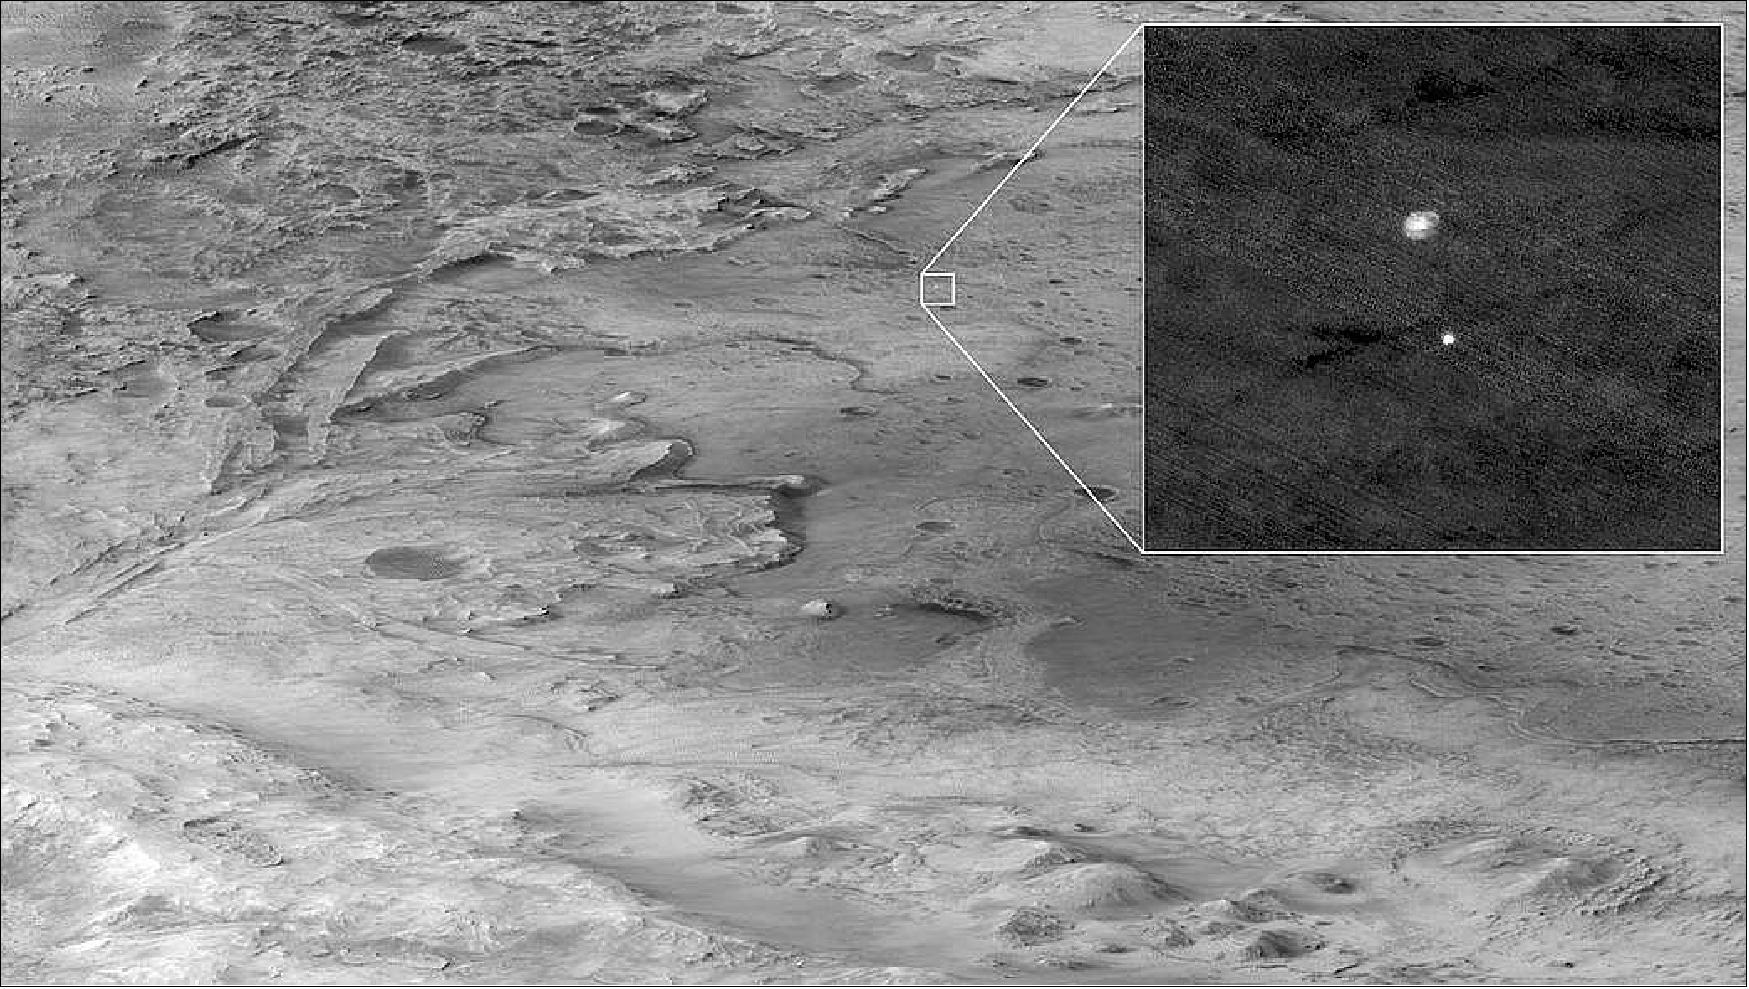 Figure 41: Landing site of Perseverance Rover on Mars. - The descent stage holding NASA's Perseverance rover can be seen falling through the Martian atmosphere, its parachute trailing behind, in this image taken on Feb. 18, 2021, by the High Resolution Imaging Experiment (HiRISE) camera aboard the Mars Reconnaissance Orbiter (image credit: NASA/JPL-Caltech)